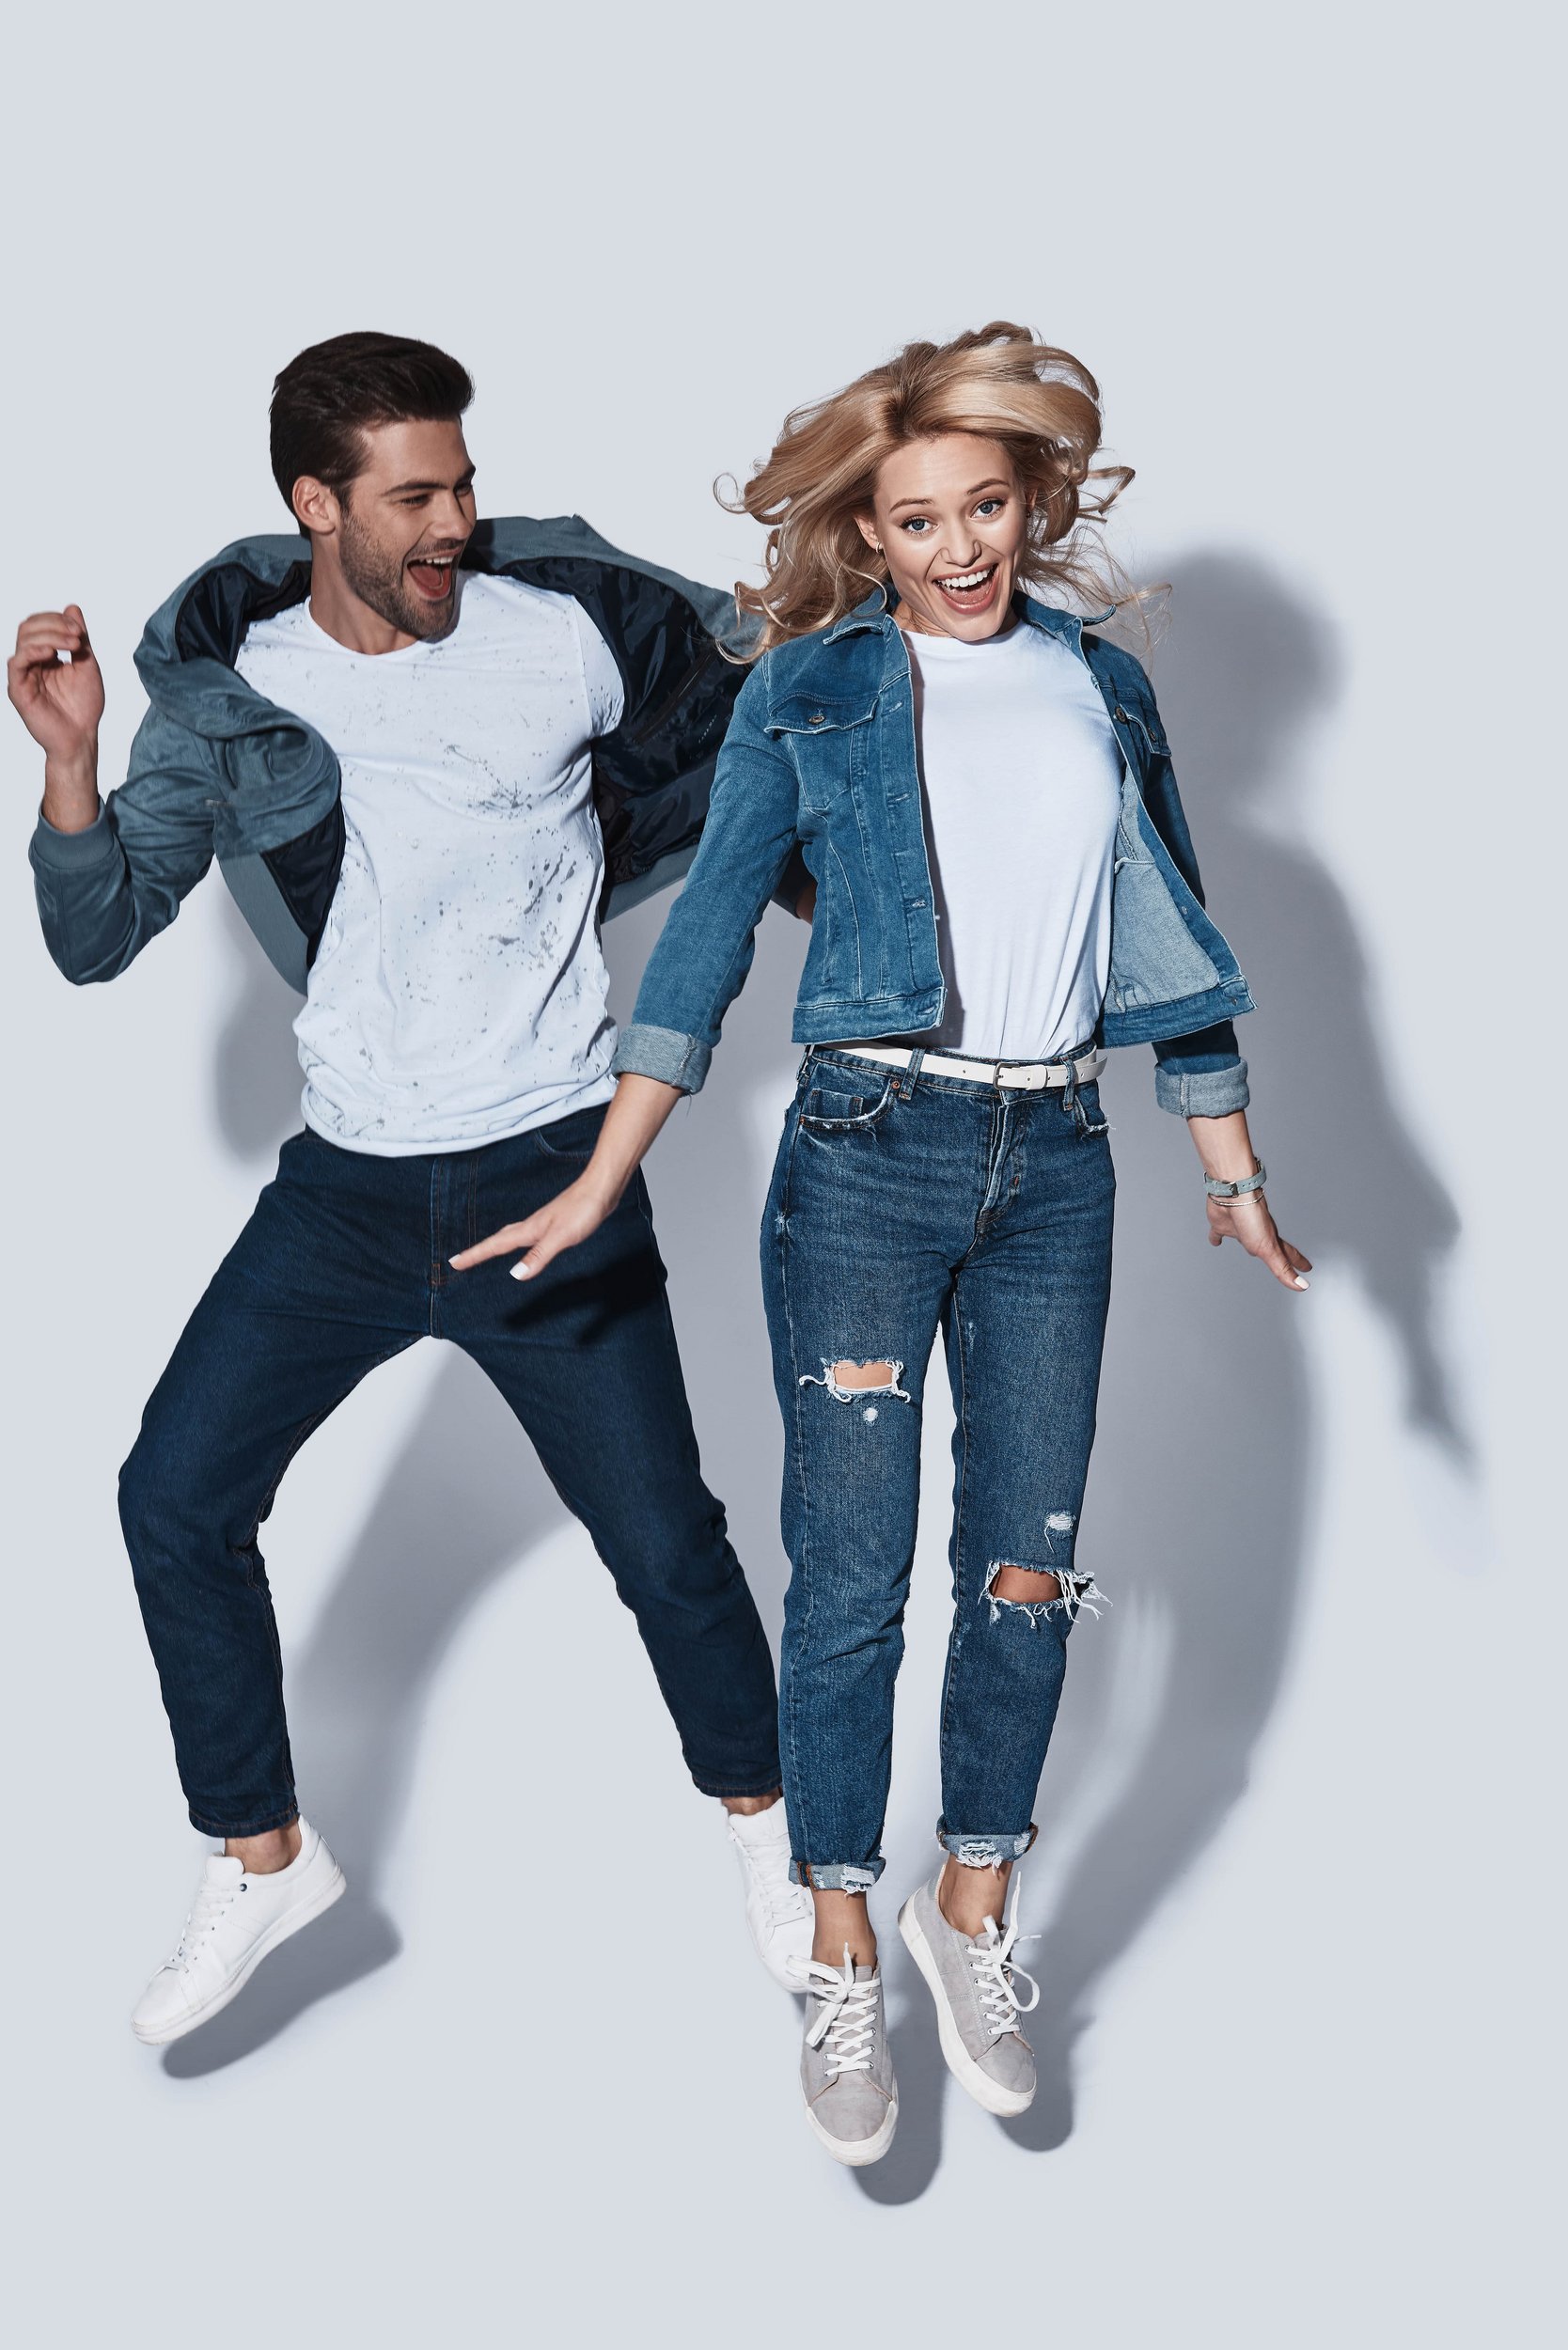 Jumping couple wearing jeans an t-shirts